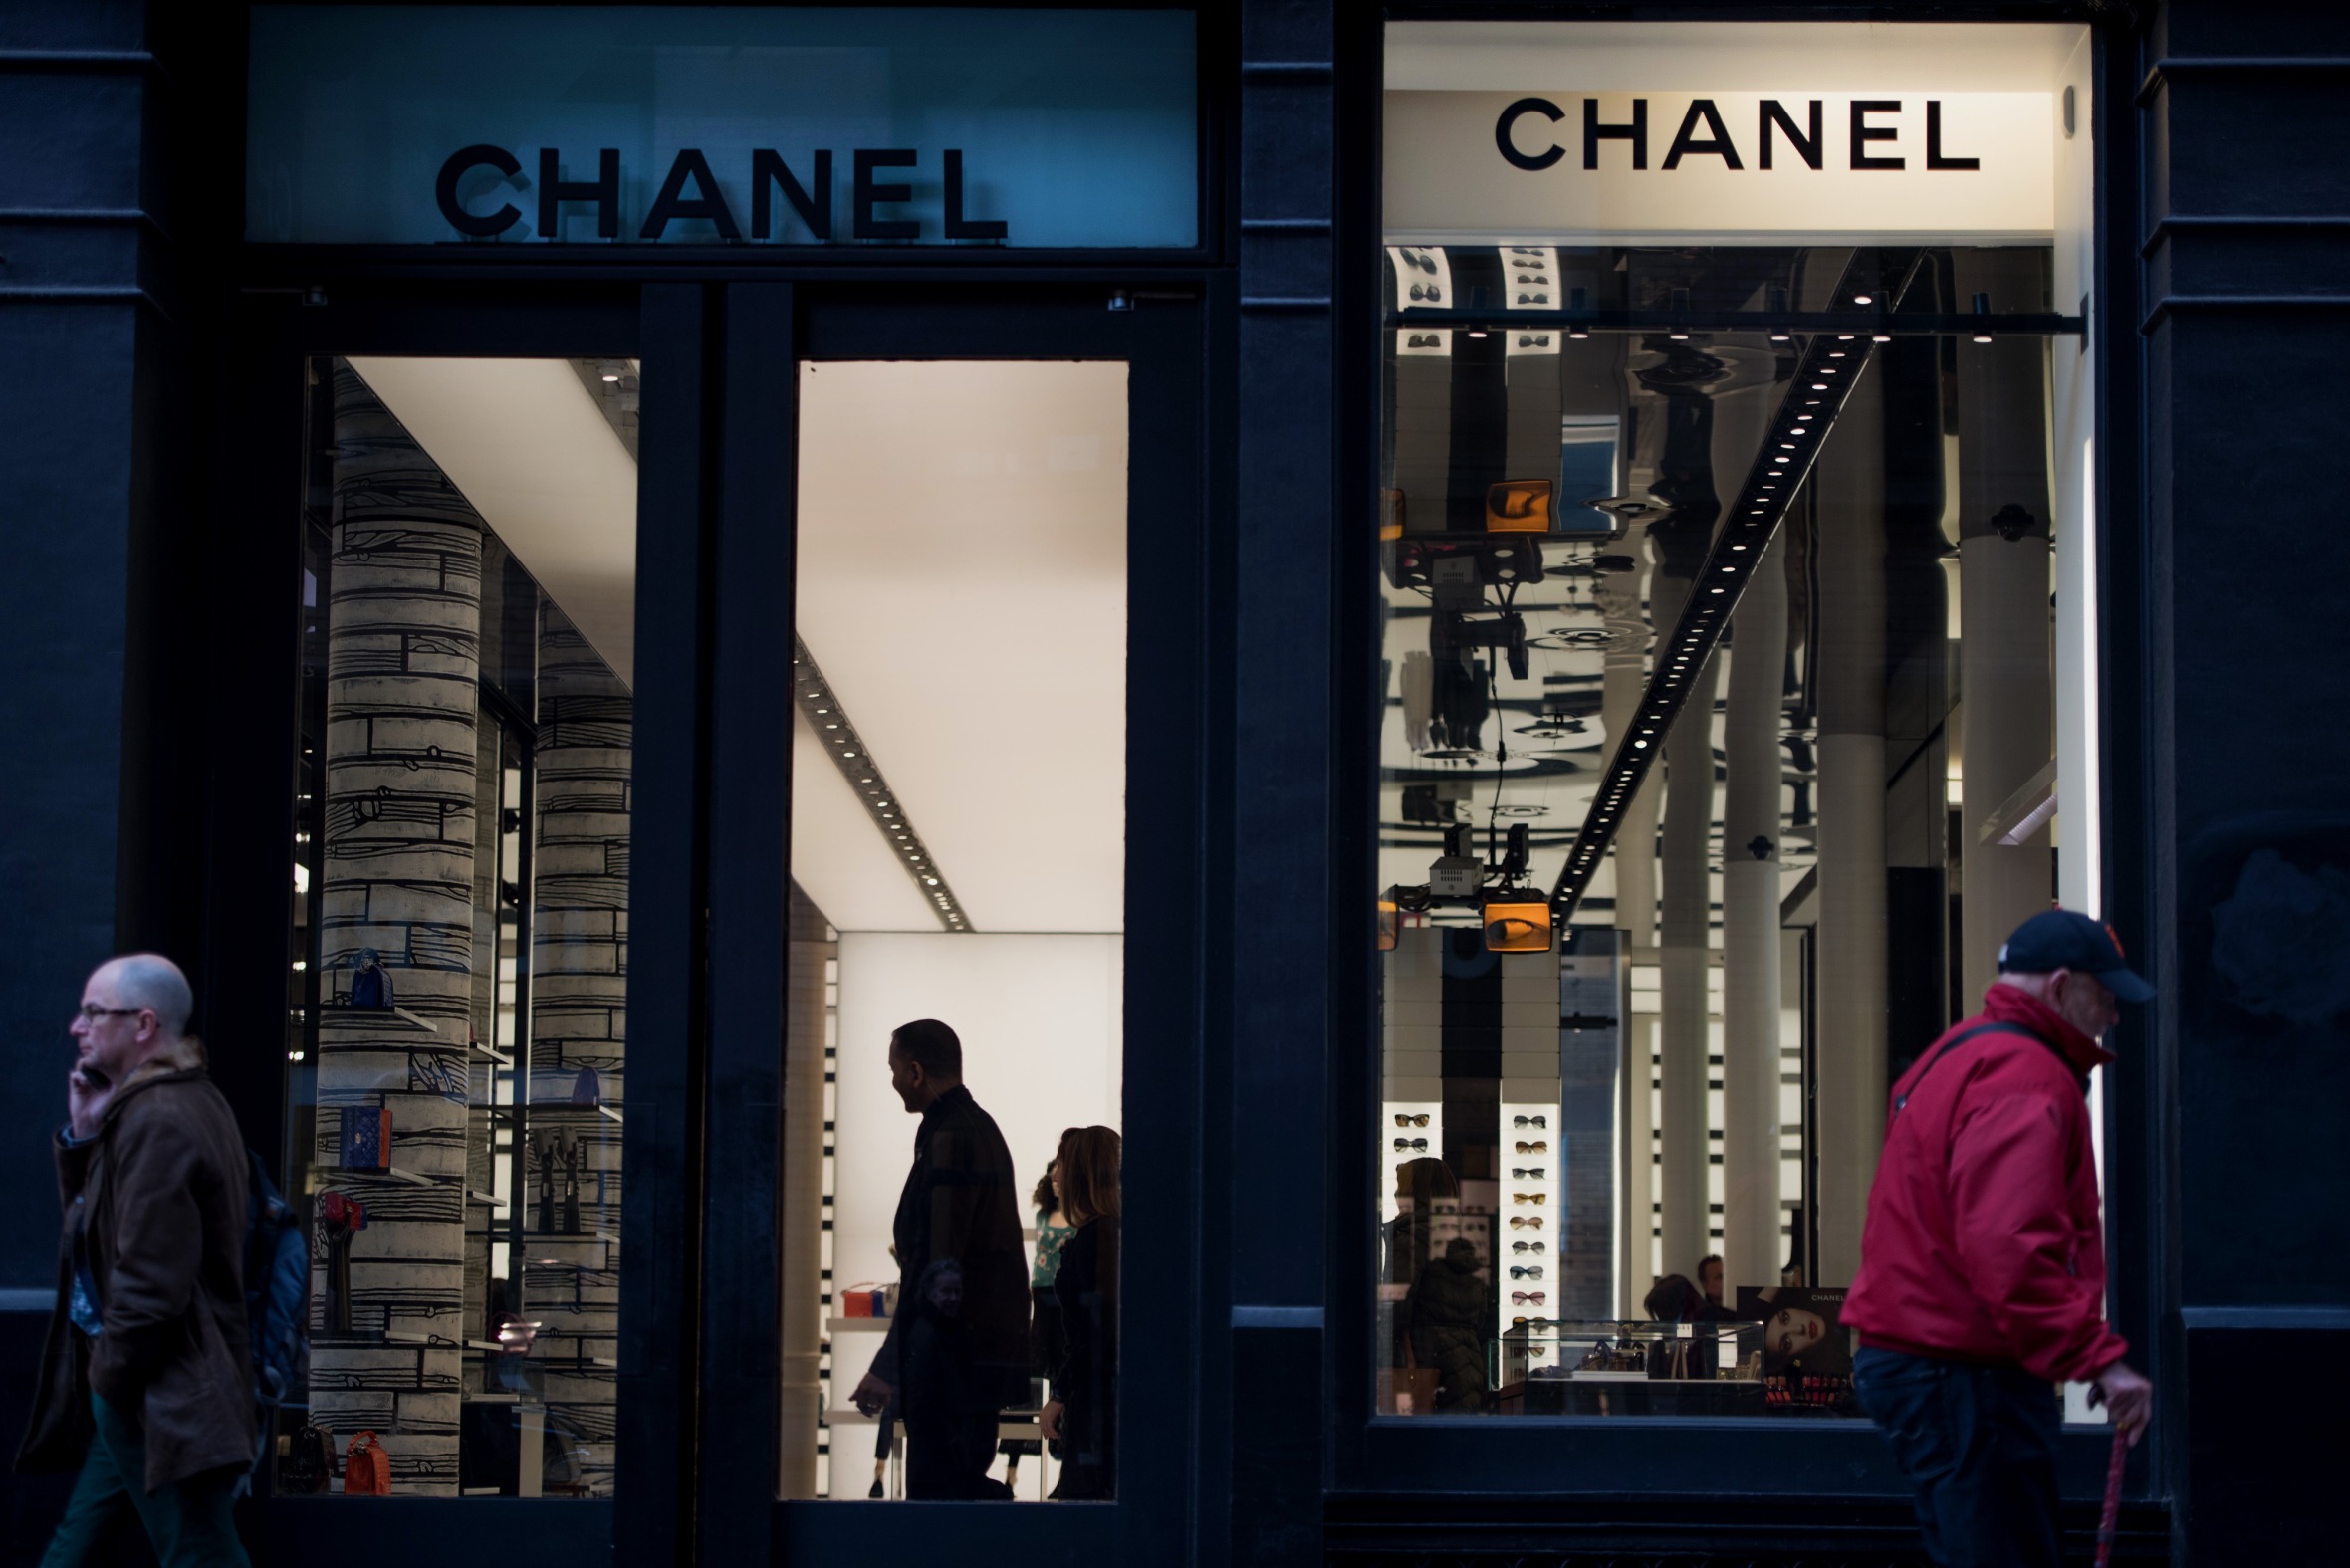 Chanel to Expand London HQ in Boost to UK Amid Post-Brexit Economy Concerns  - Bloomberg